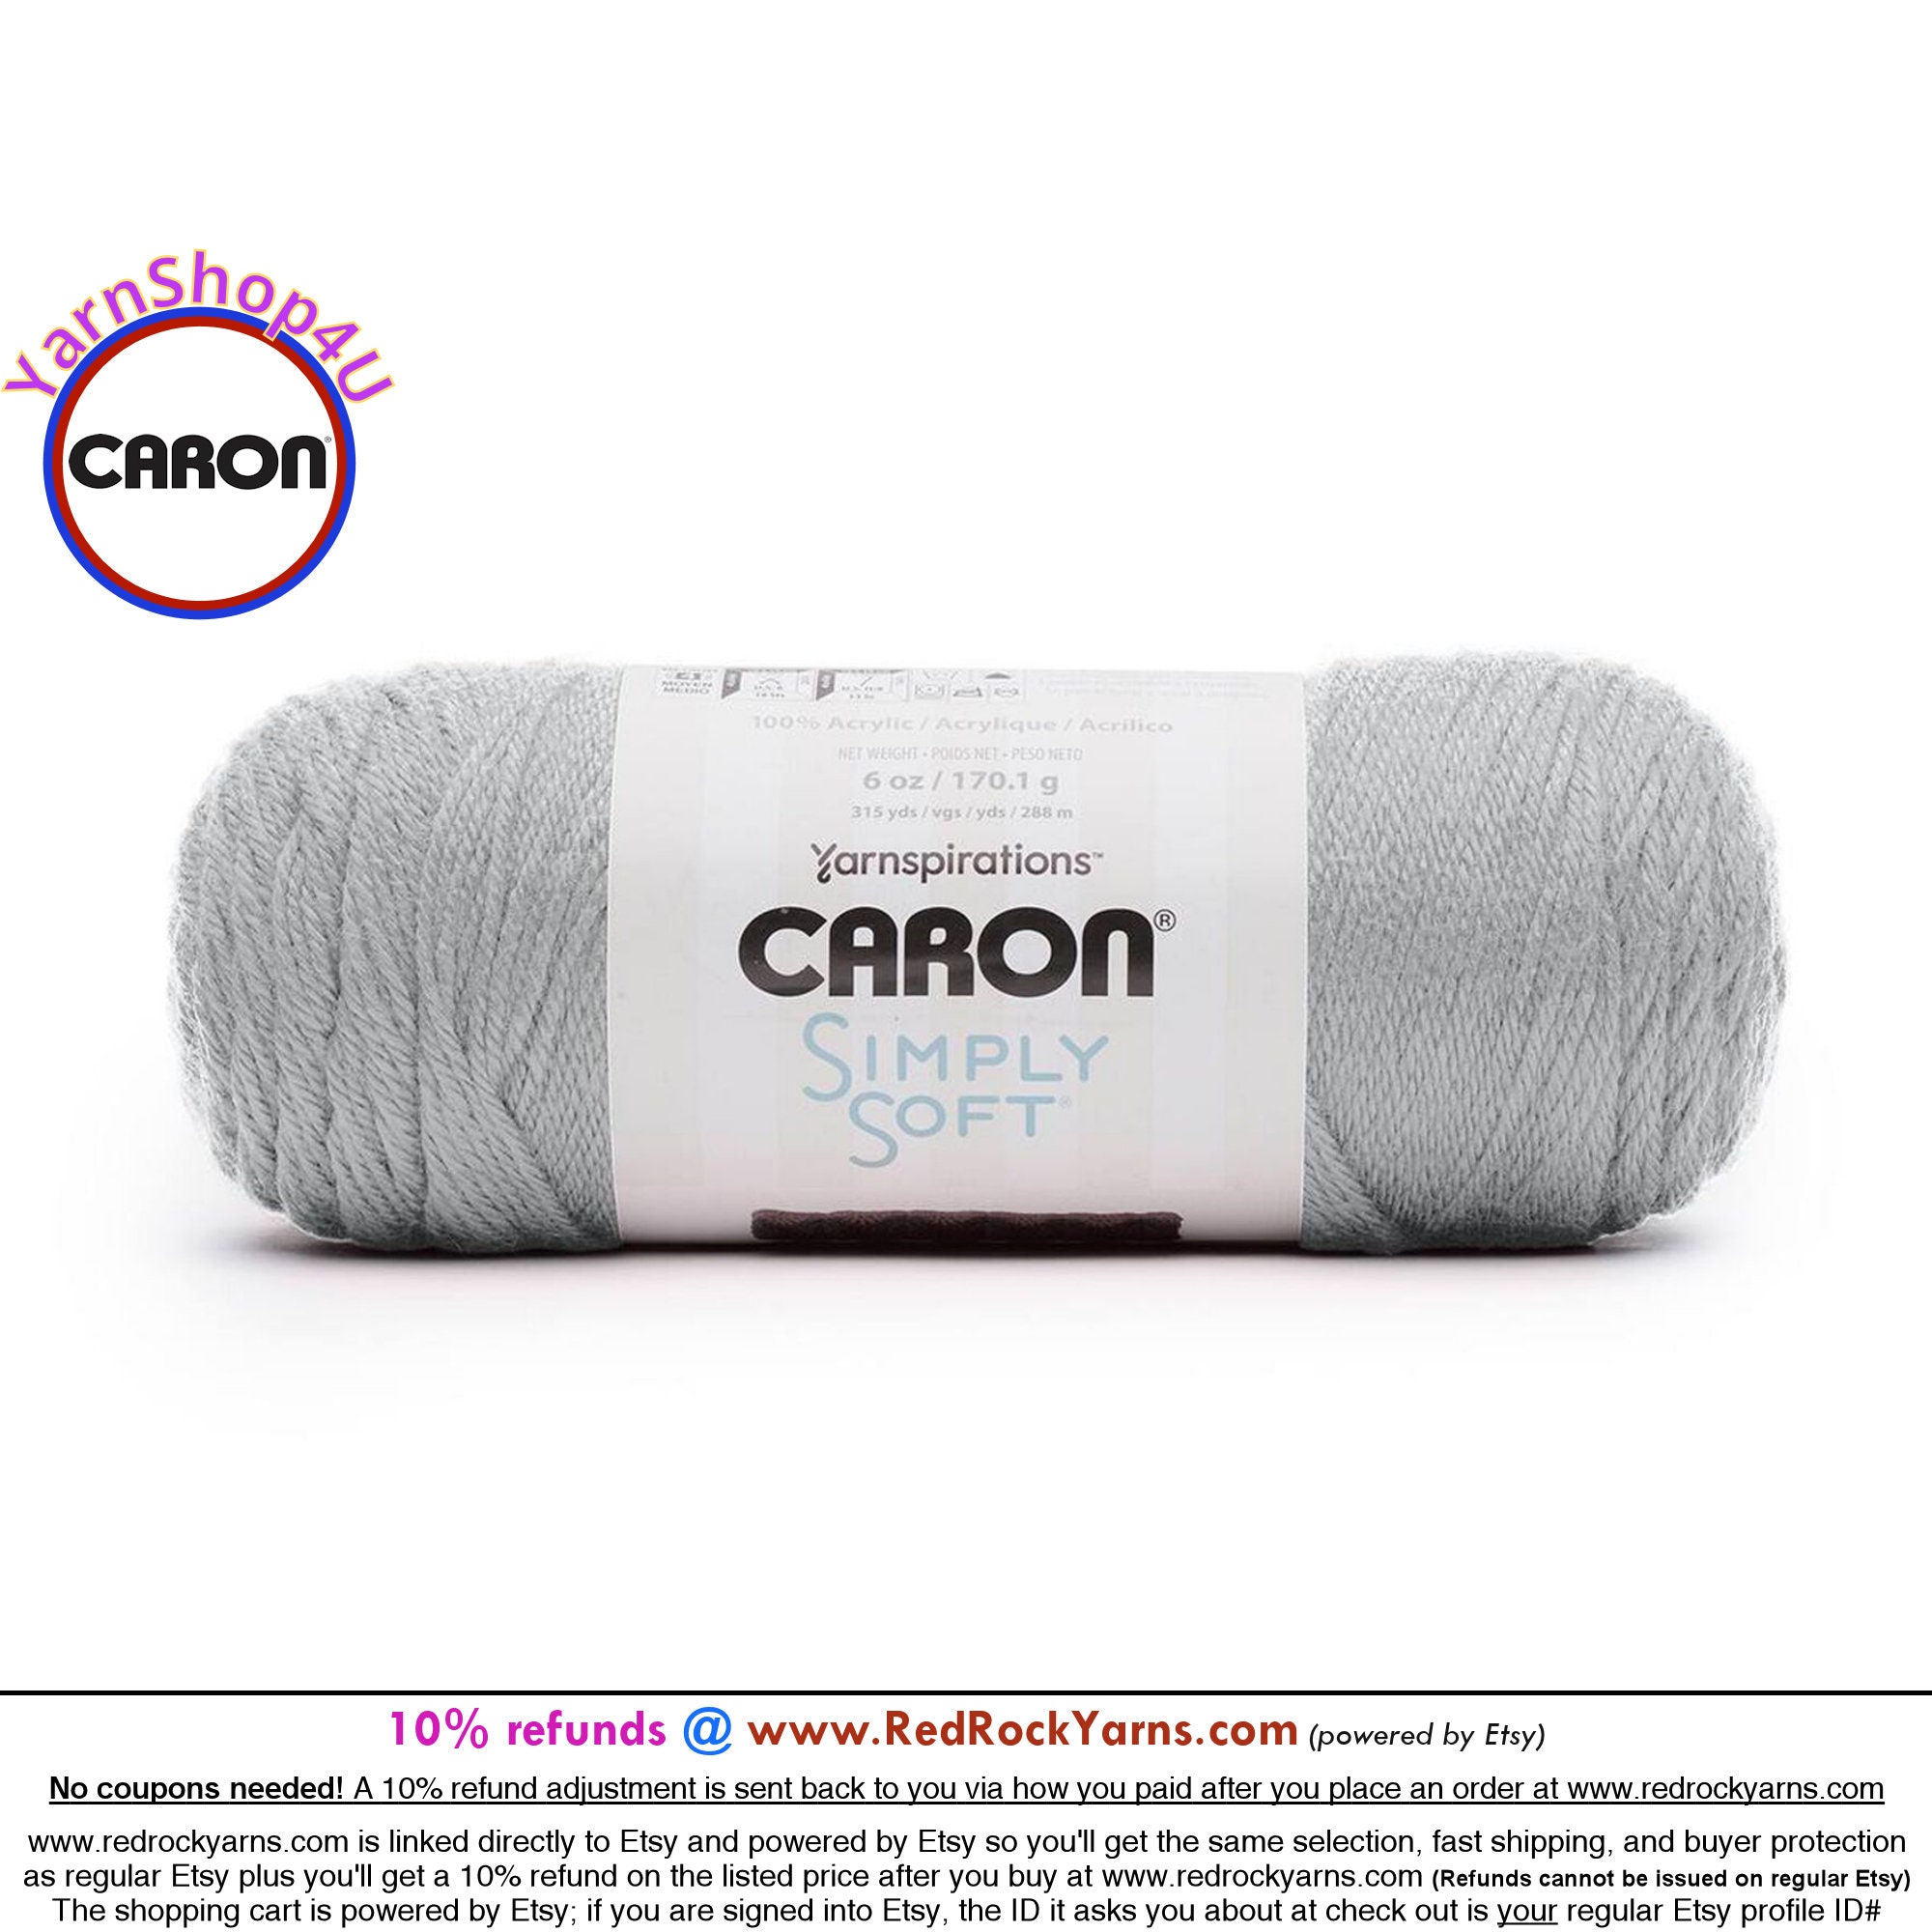 FEATHERED GRAY - Caron Simply Soft 6oz / 315yds (170g / 288m) 100